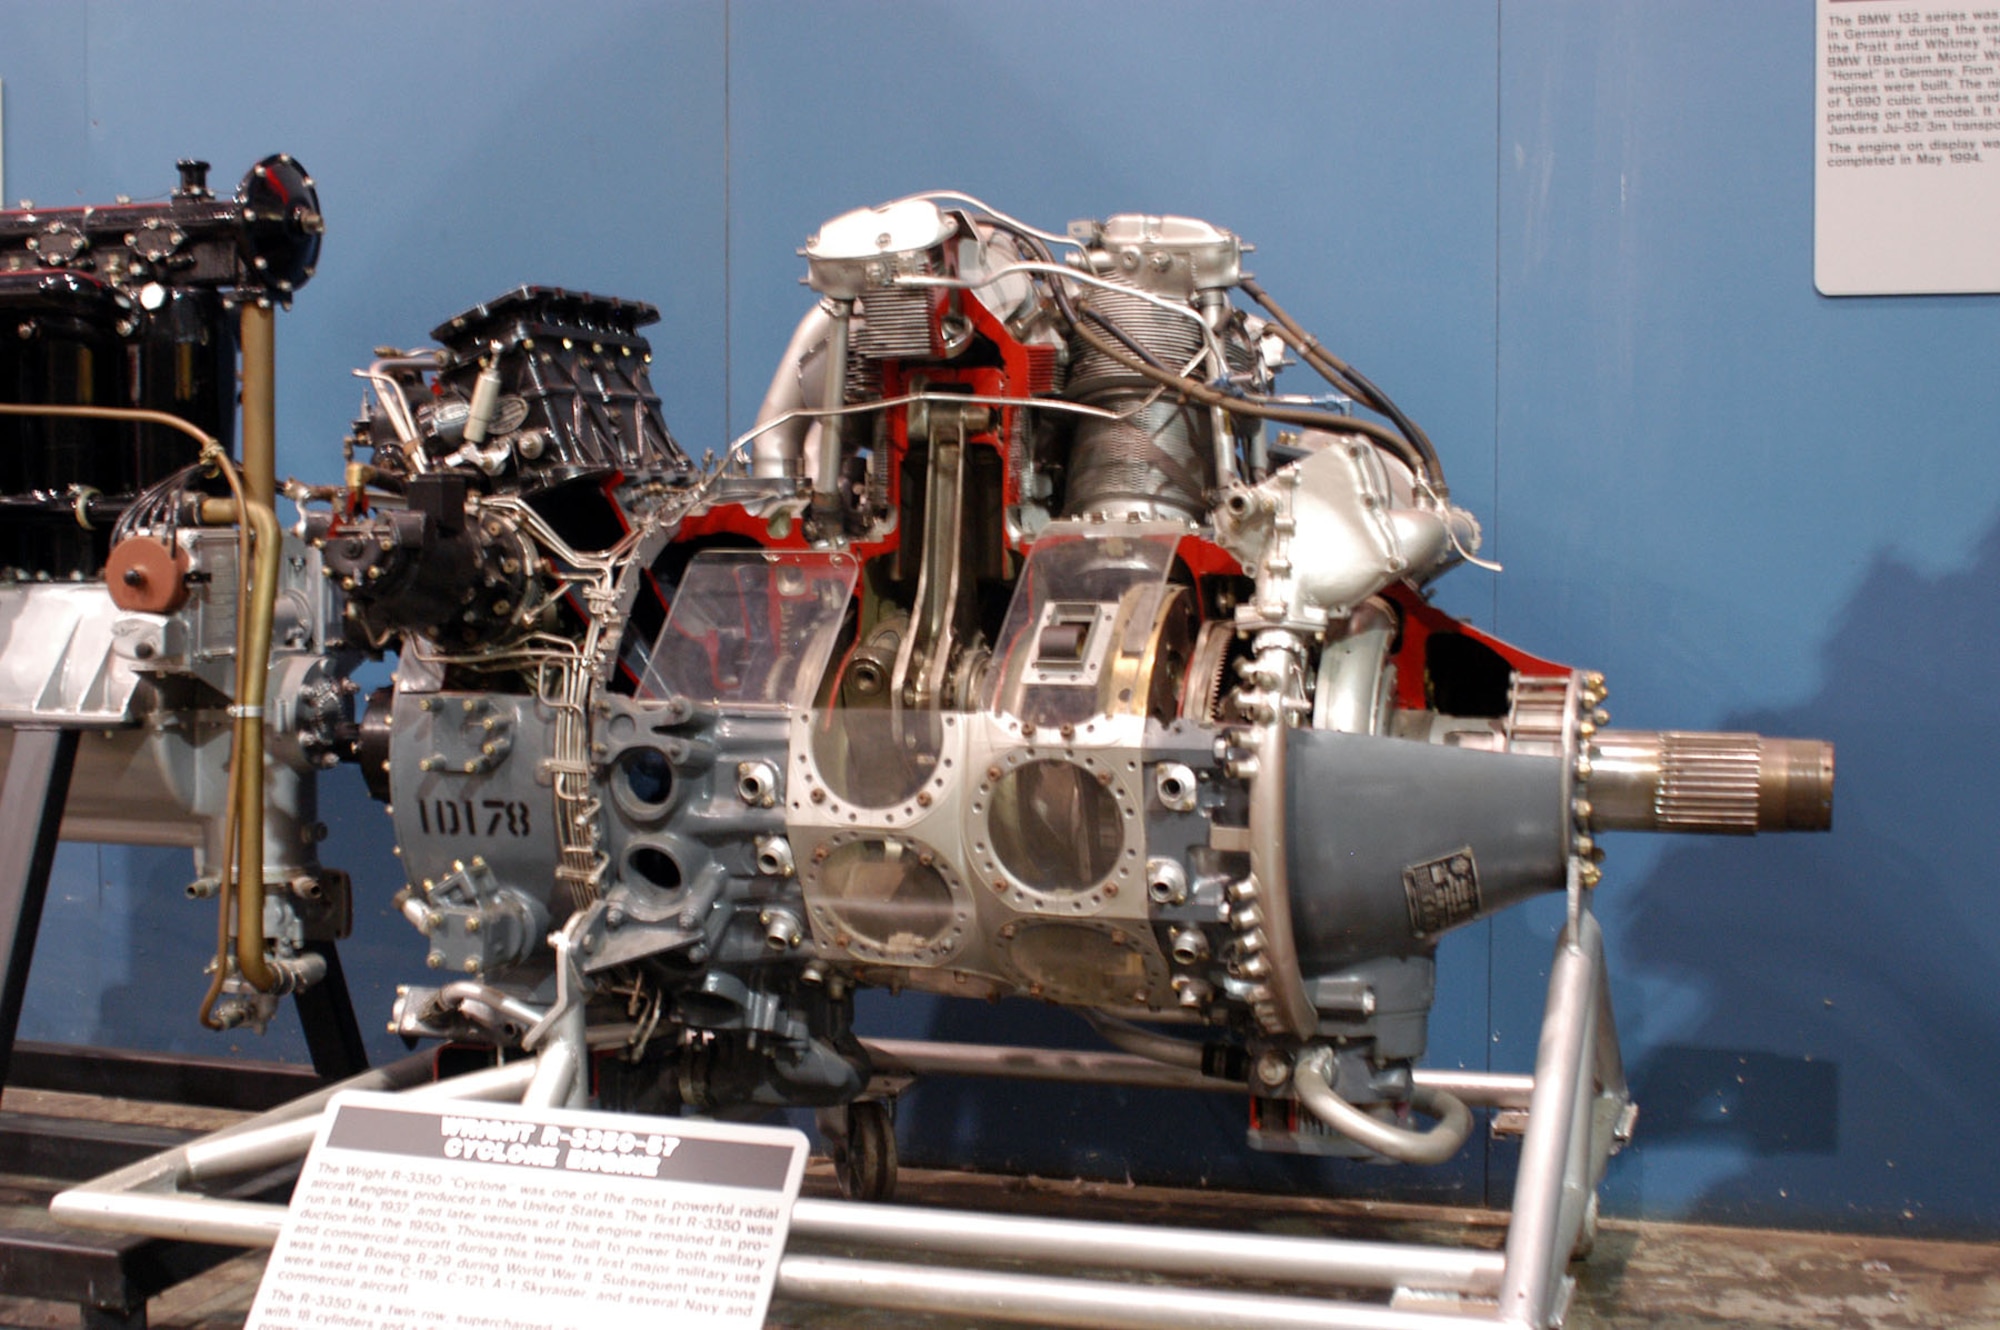 DAYTON, Ohio -- Wright R-3350-57 Cyclone engine on display in the Research & Development Gallery at the National Museum of the United States Air Force. (U.S. Air Force photo)